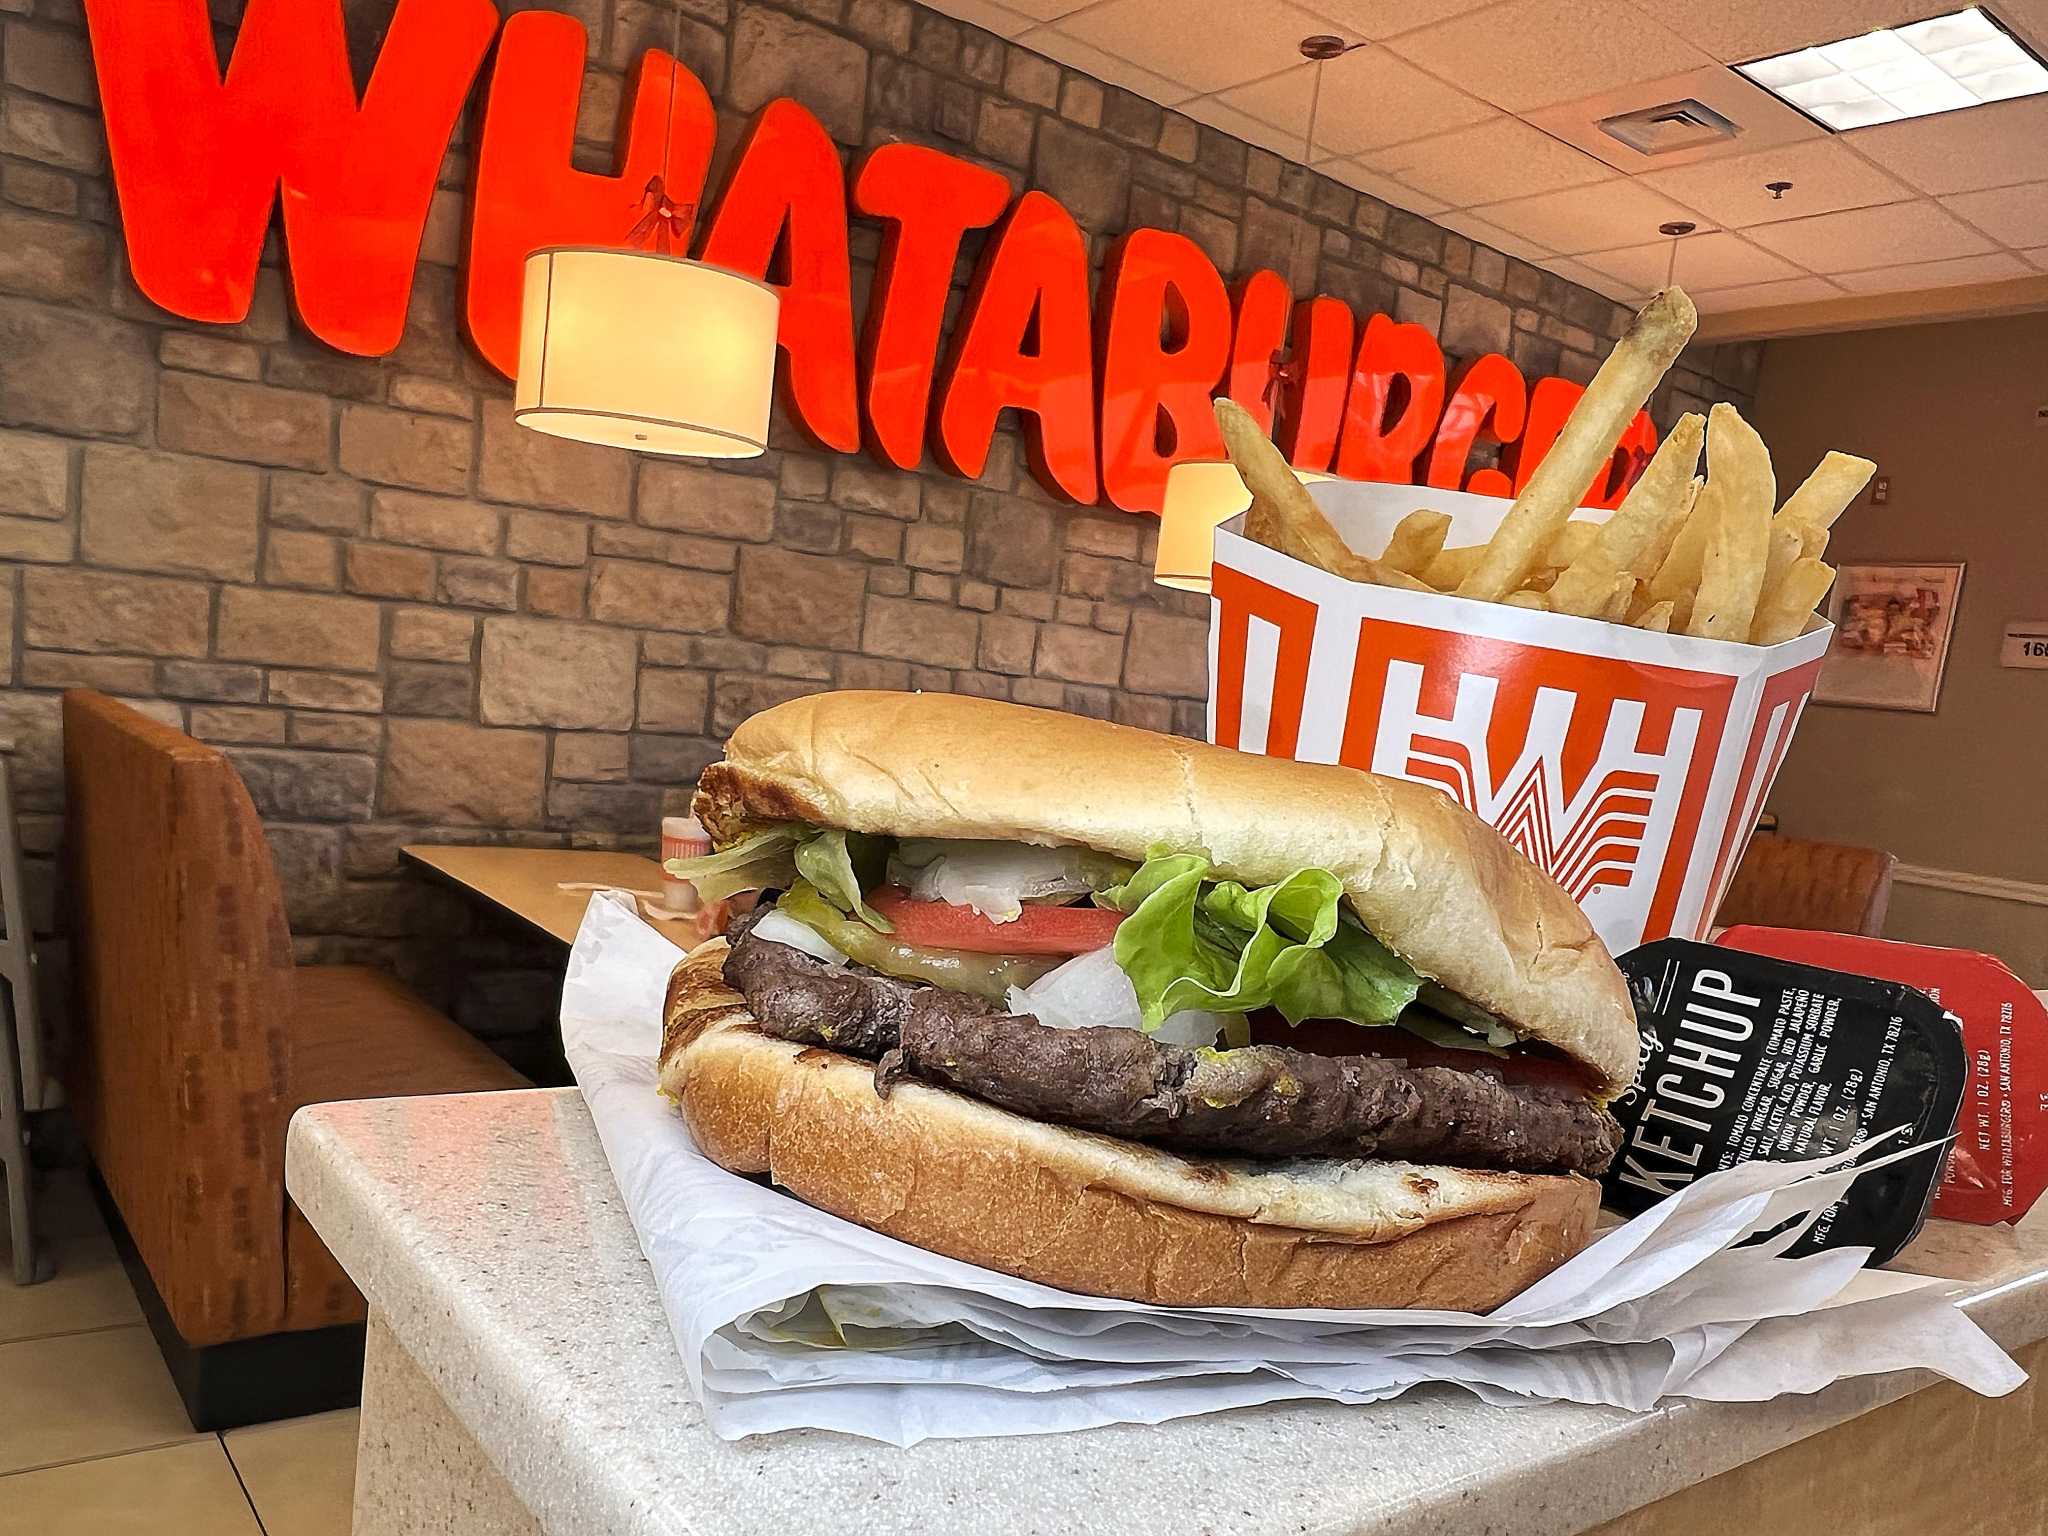 National Whataburger Day is coming. Here's how to score a free burger